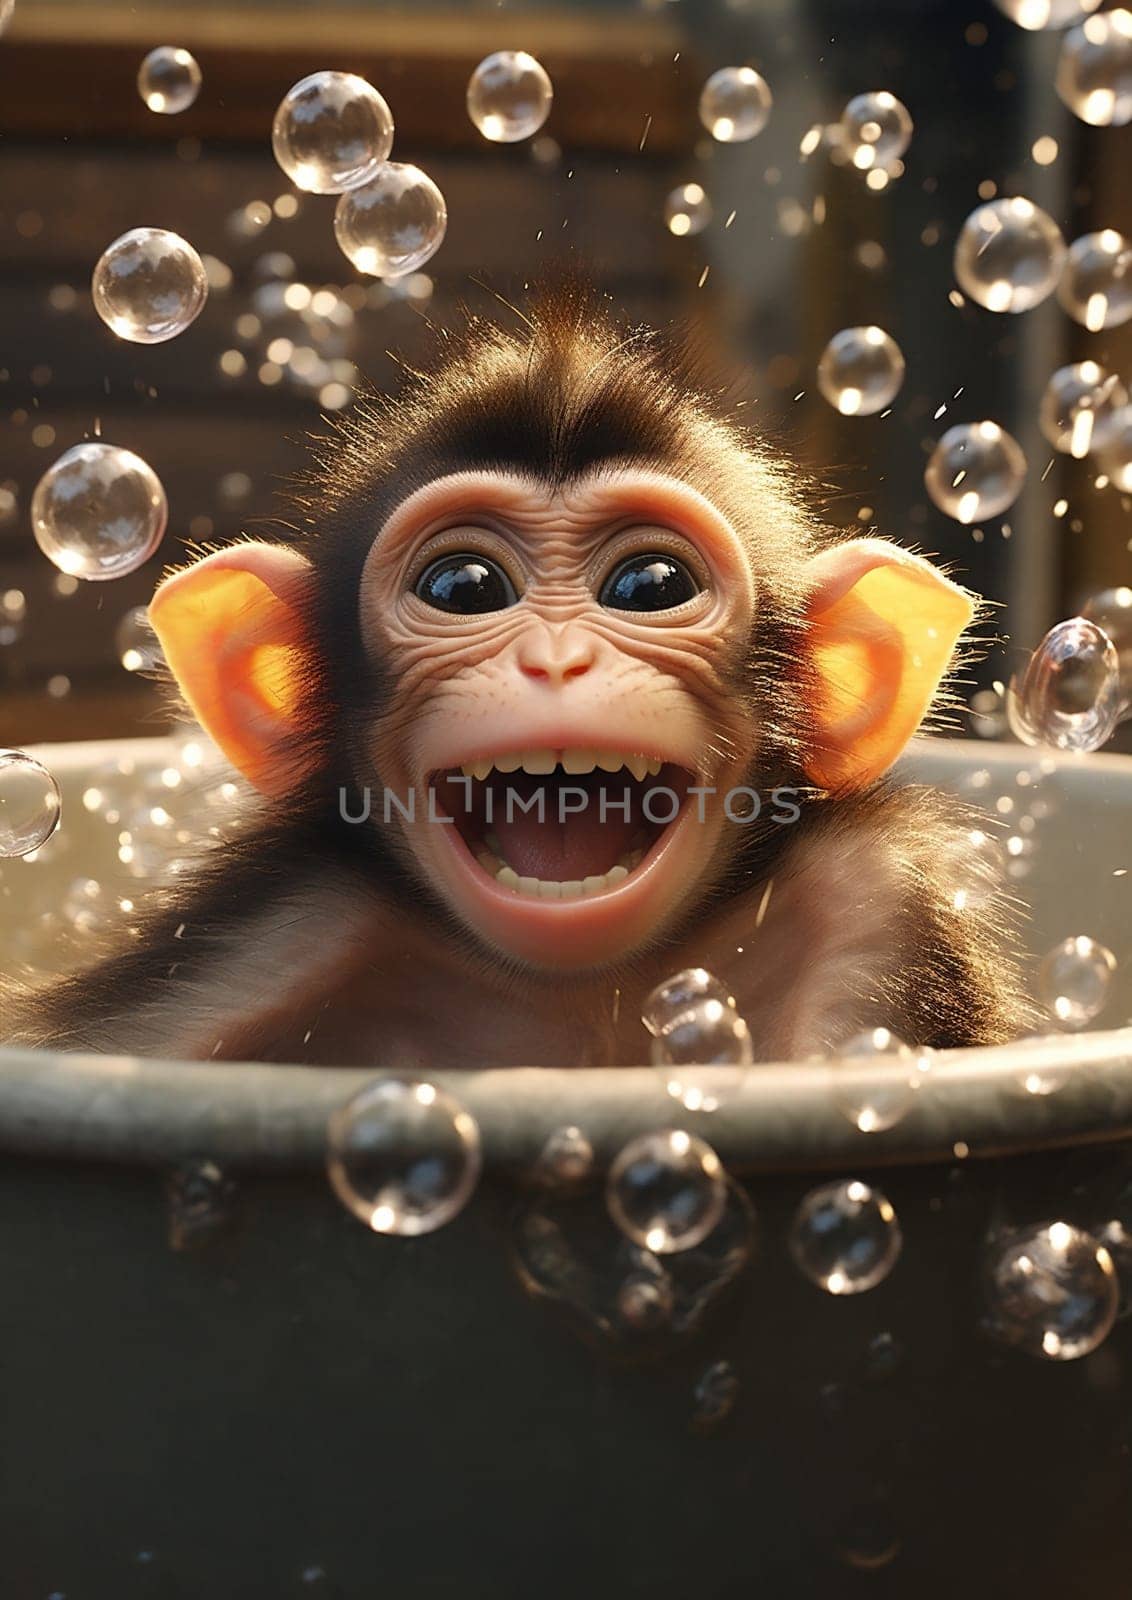 Fur baby funny ape nature portrait wildlife primate jungle young wild face animals tropical forest mammal asia macaque monkey cute tree